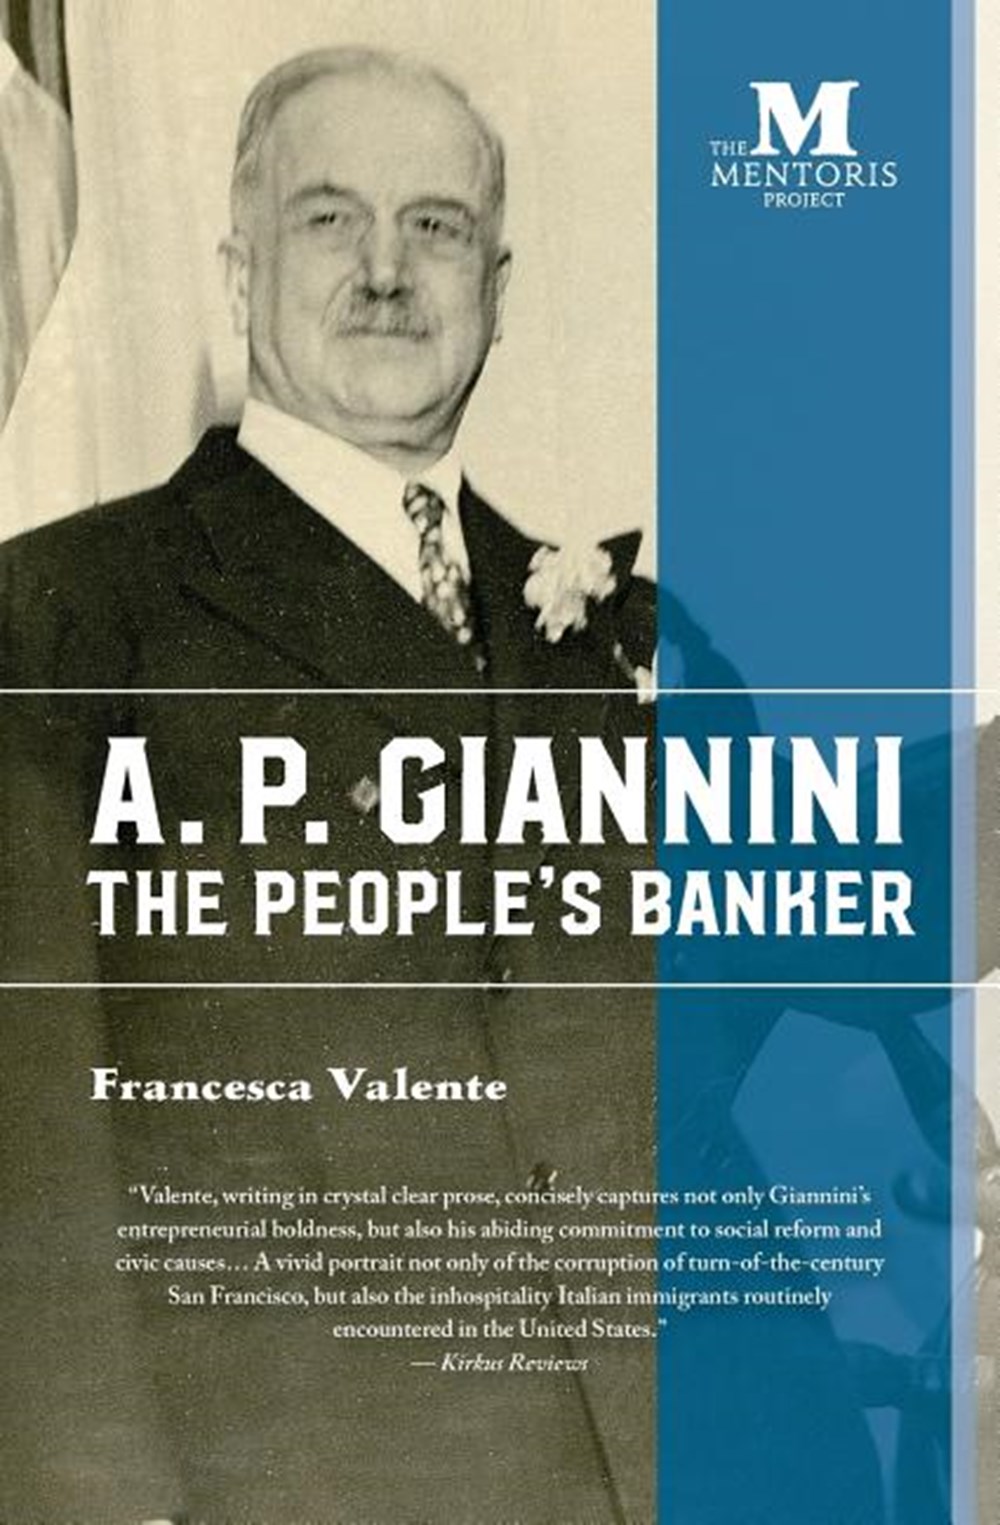 A. P. Giannini The People's Banker